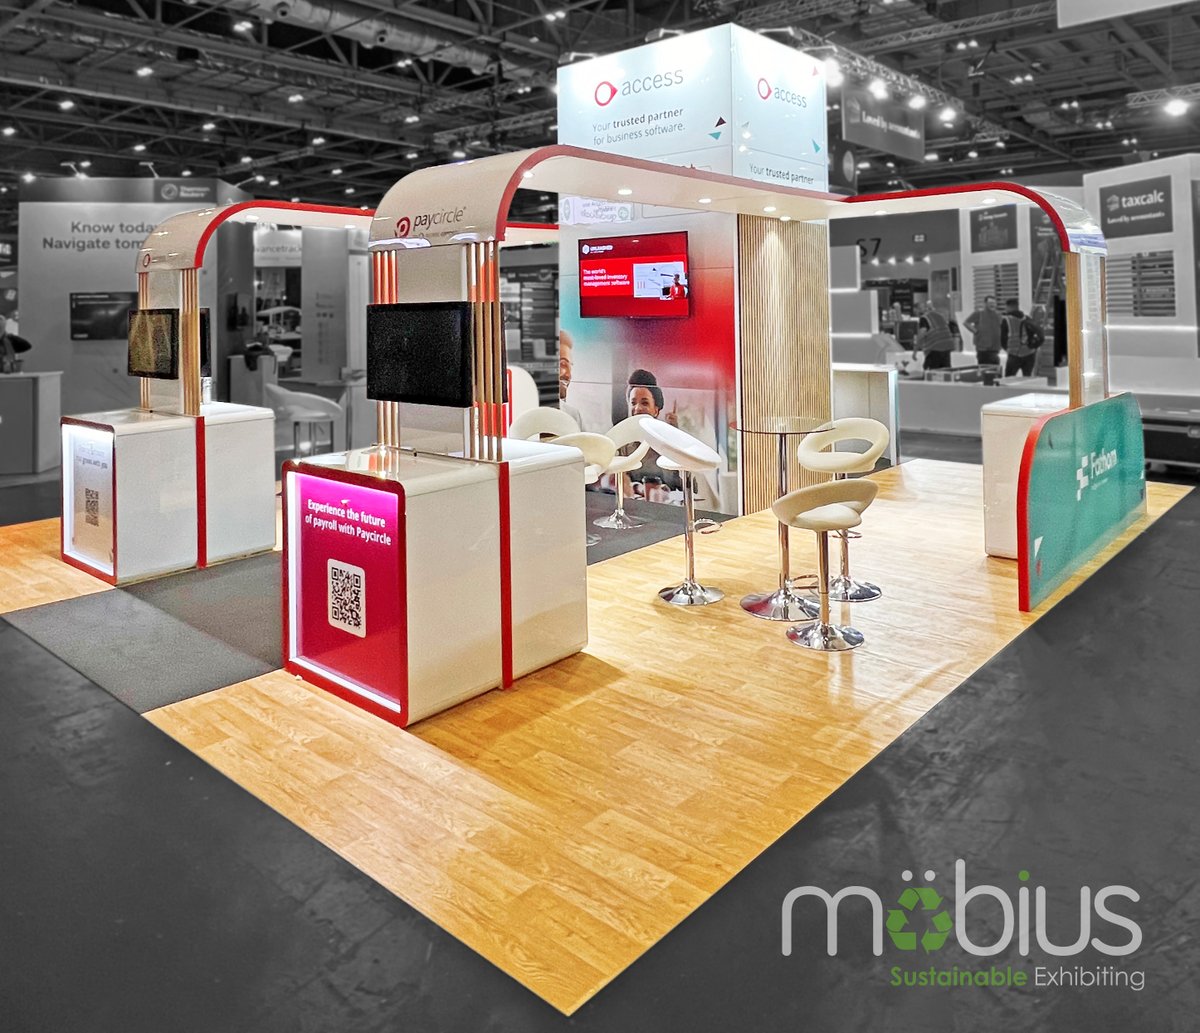 This week we at opposite ends of the country with our stand installations. The Access Group are at #Accountex #ExCeLLondon and UKRI Innovate UK at #AllEnergy24 #SECGlasgow #exhibition #booth #design #build #installation #sustainable #exhibiting